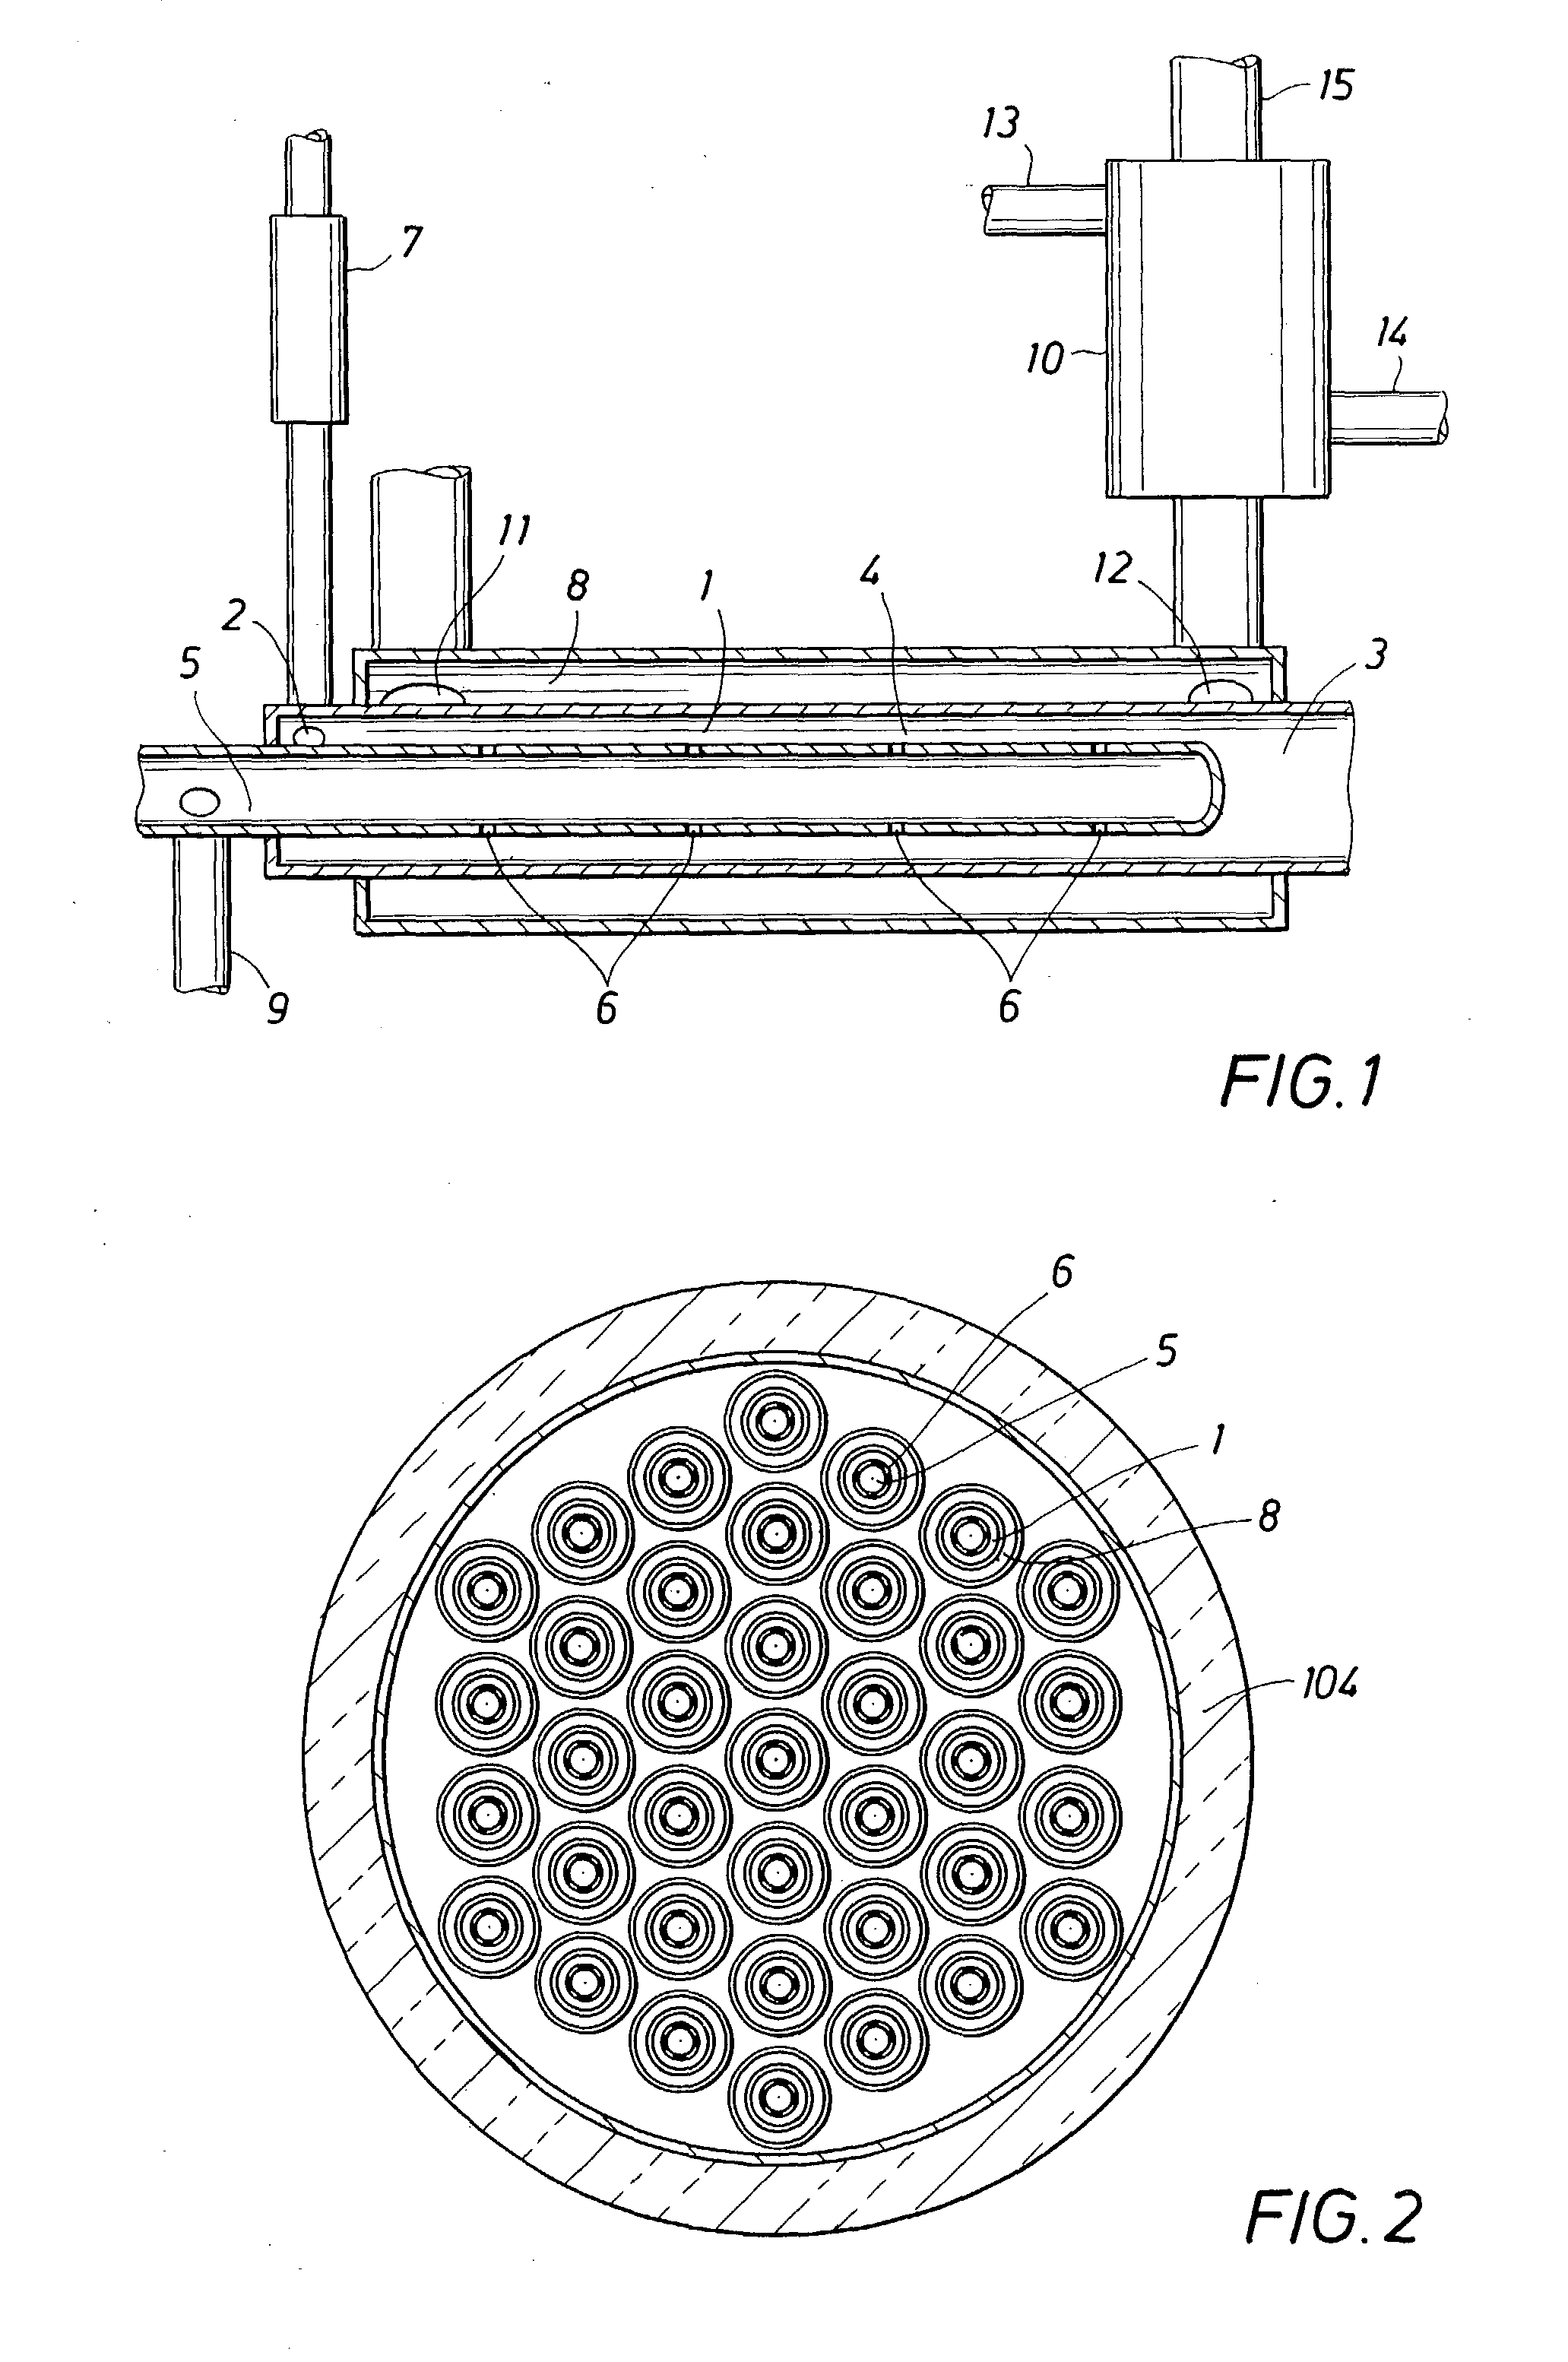 Method for providing controlled heat to a process